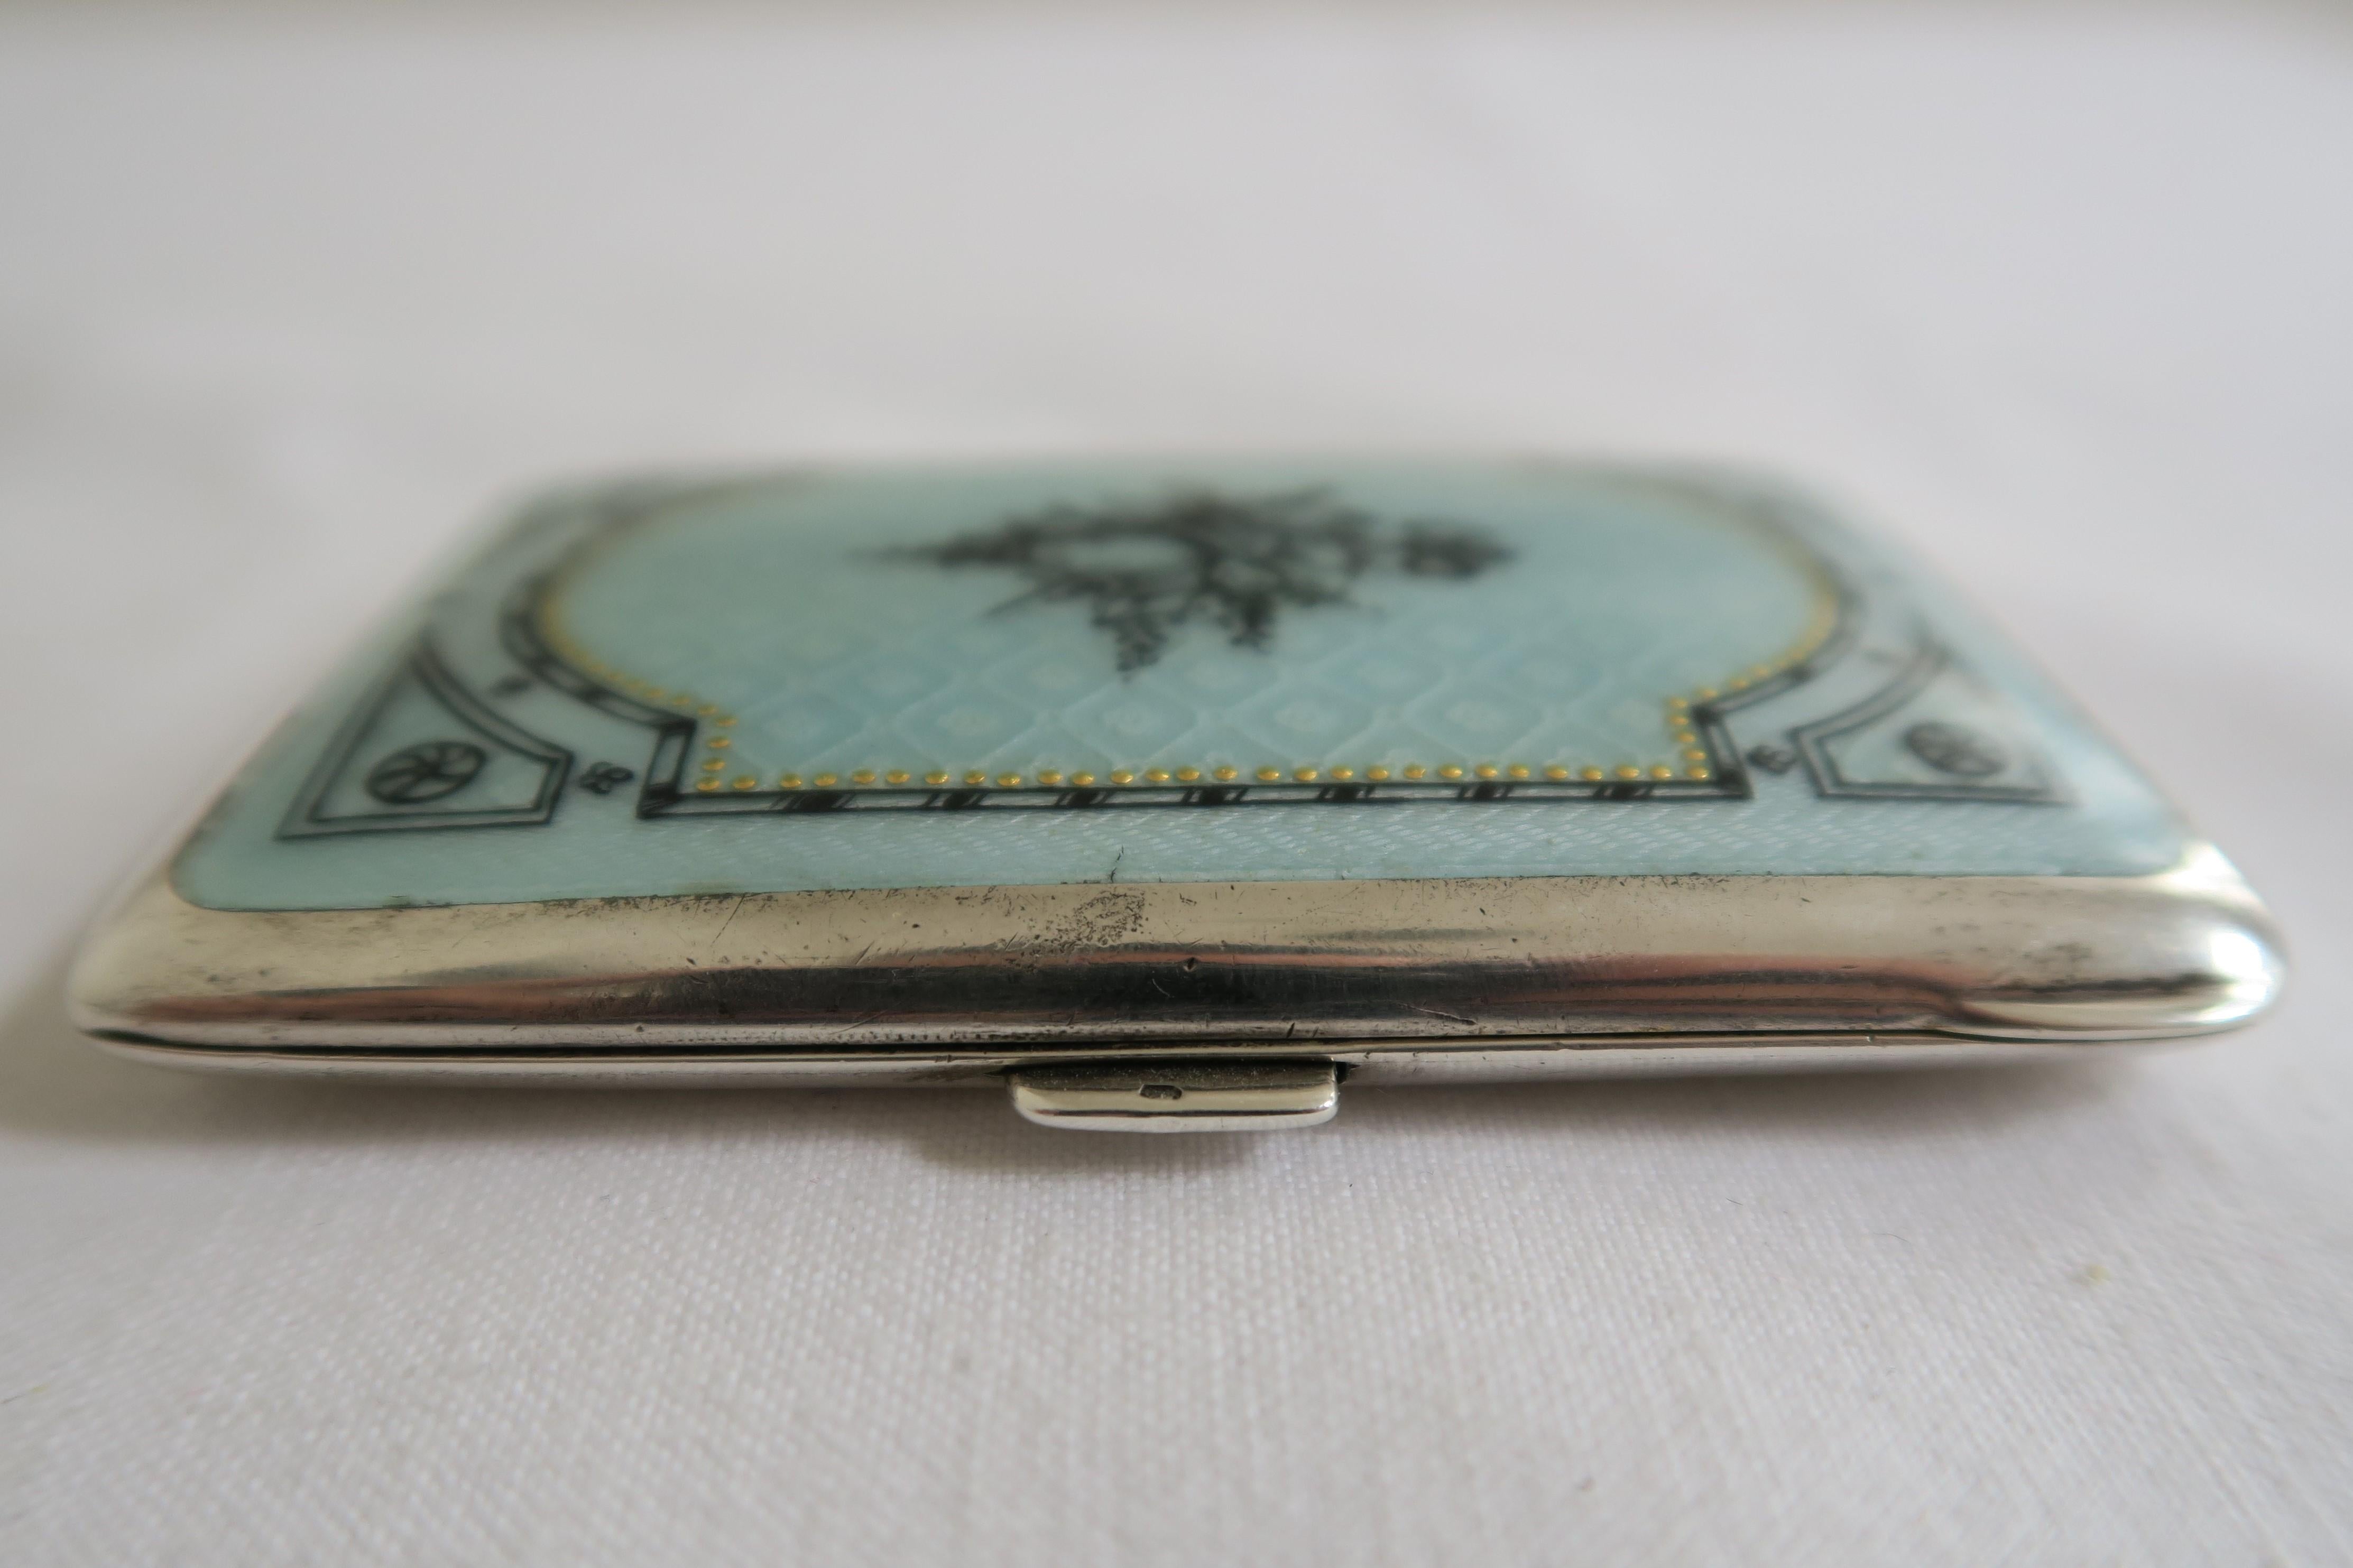 For sale is a delicate little cigarette box. It is made from 900/1000 silver stamped L/R. The inside is gilded and shows the German hallmark of half moon and crown. The lid is embellished with turquoise enamel, covered in hand painted white floral